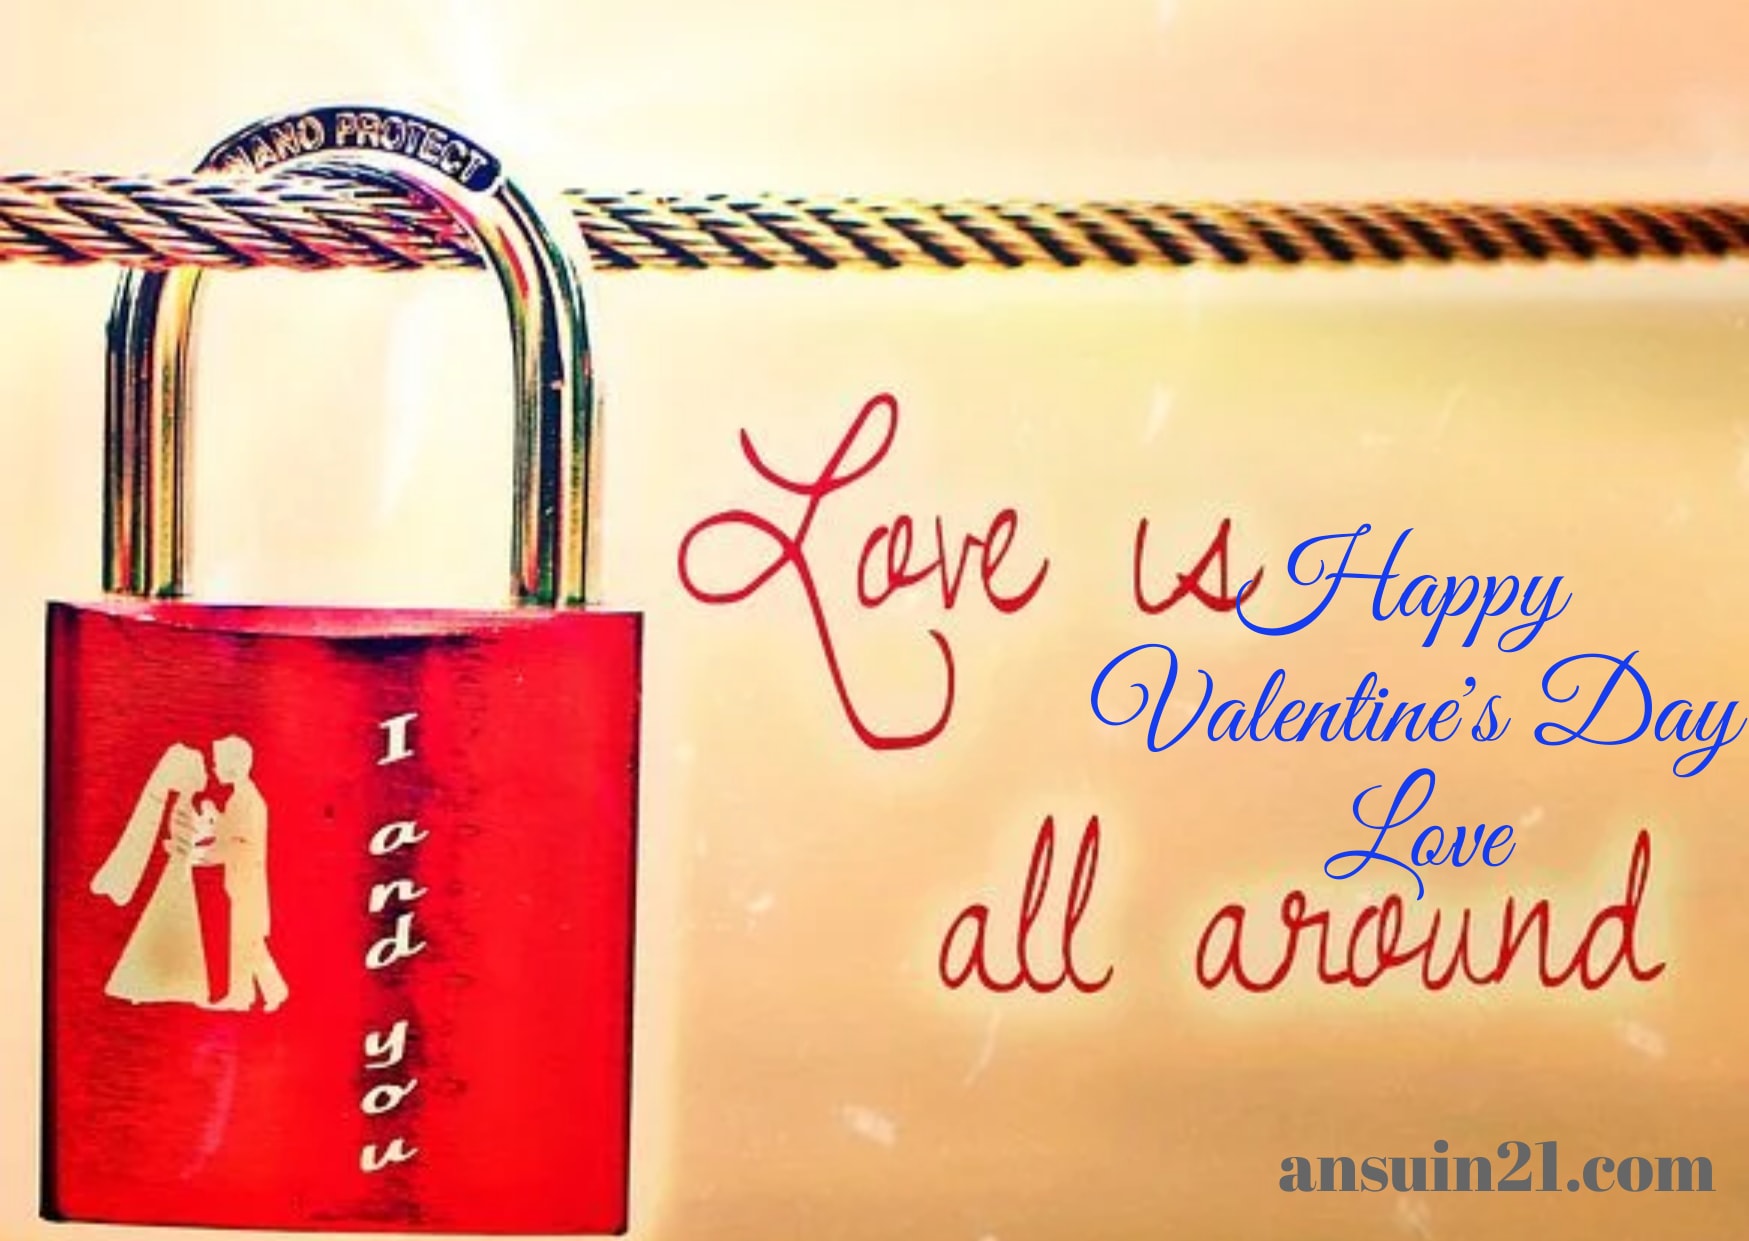 Best Happy Valentine's Day Wishes, Images & Quotes